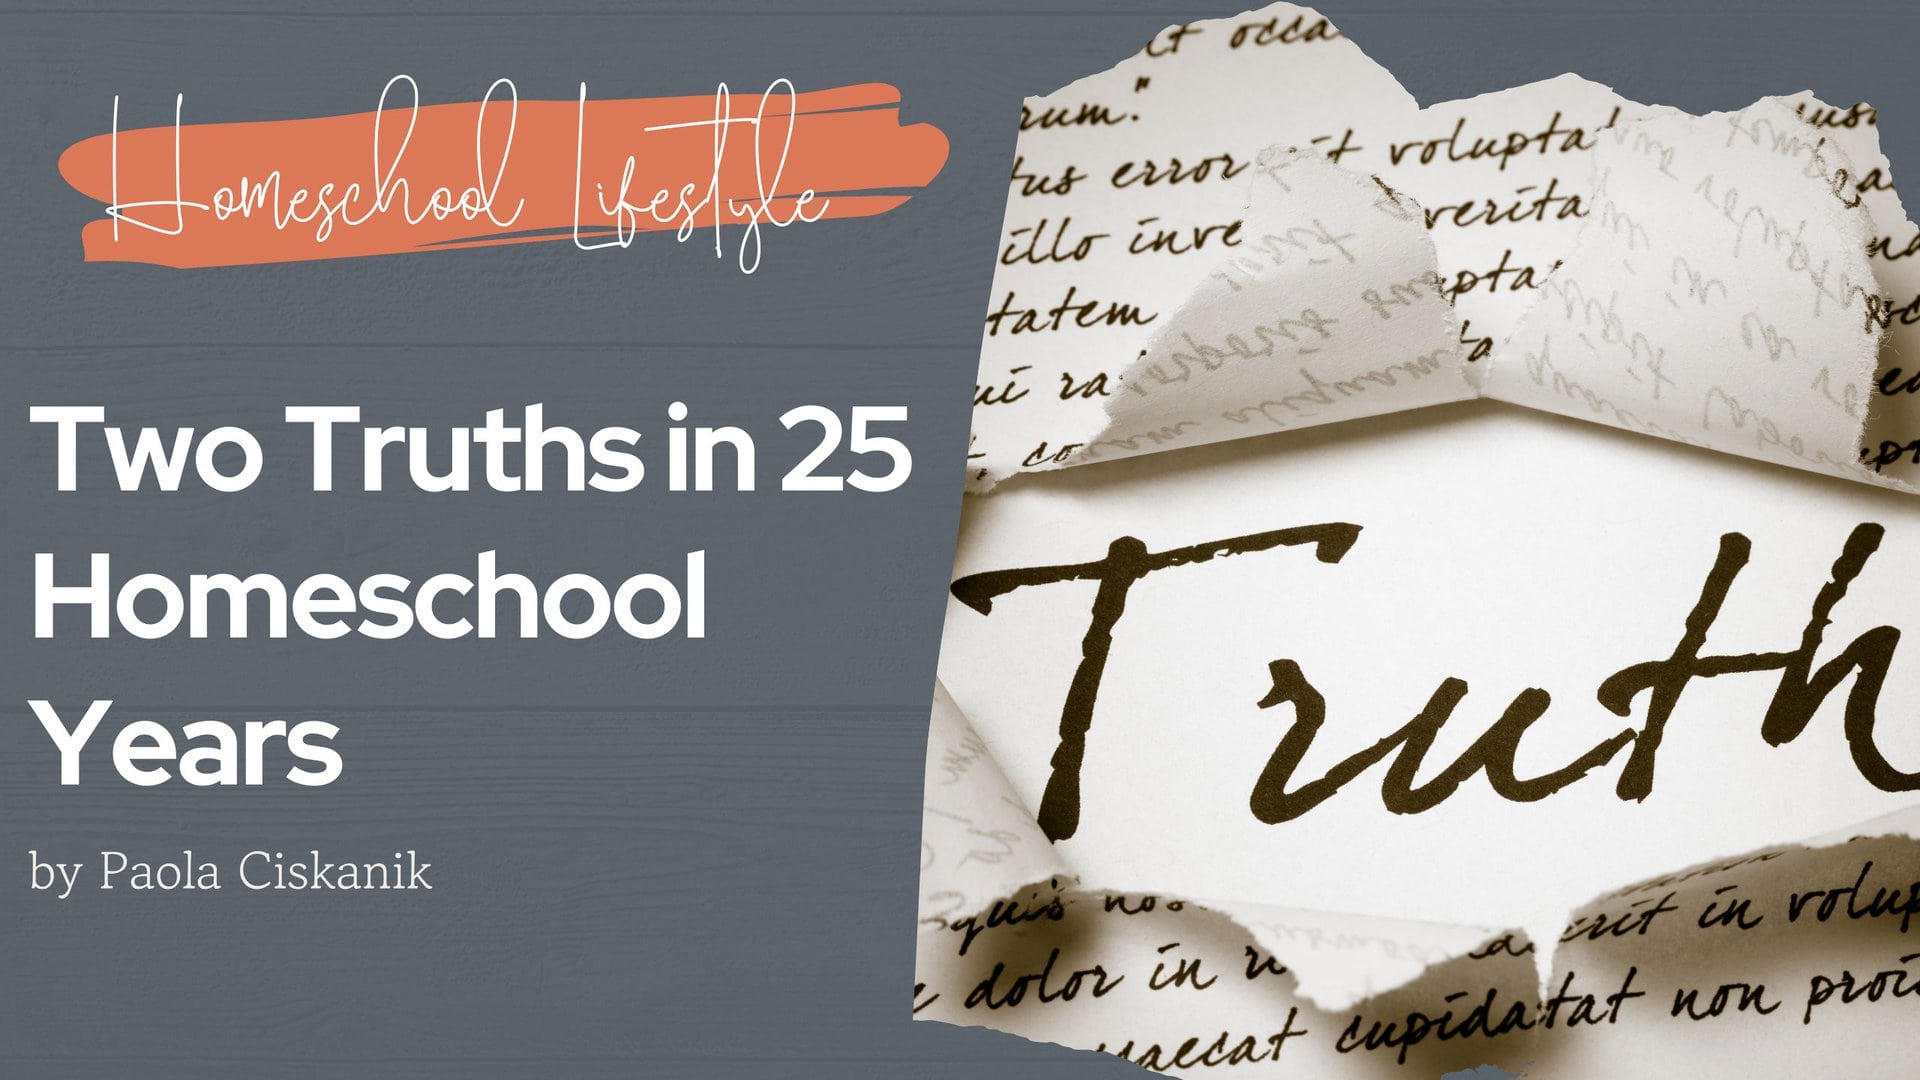 Blog two truths in 25 years